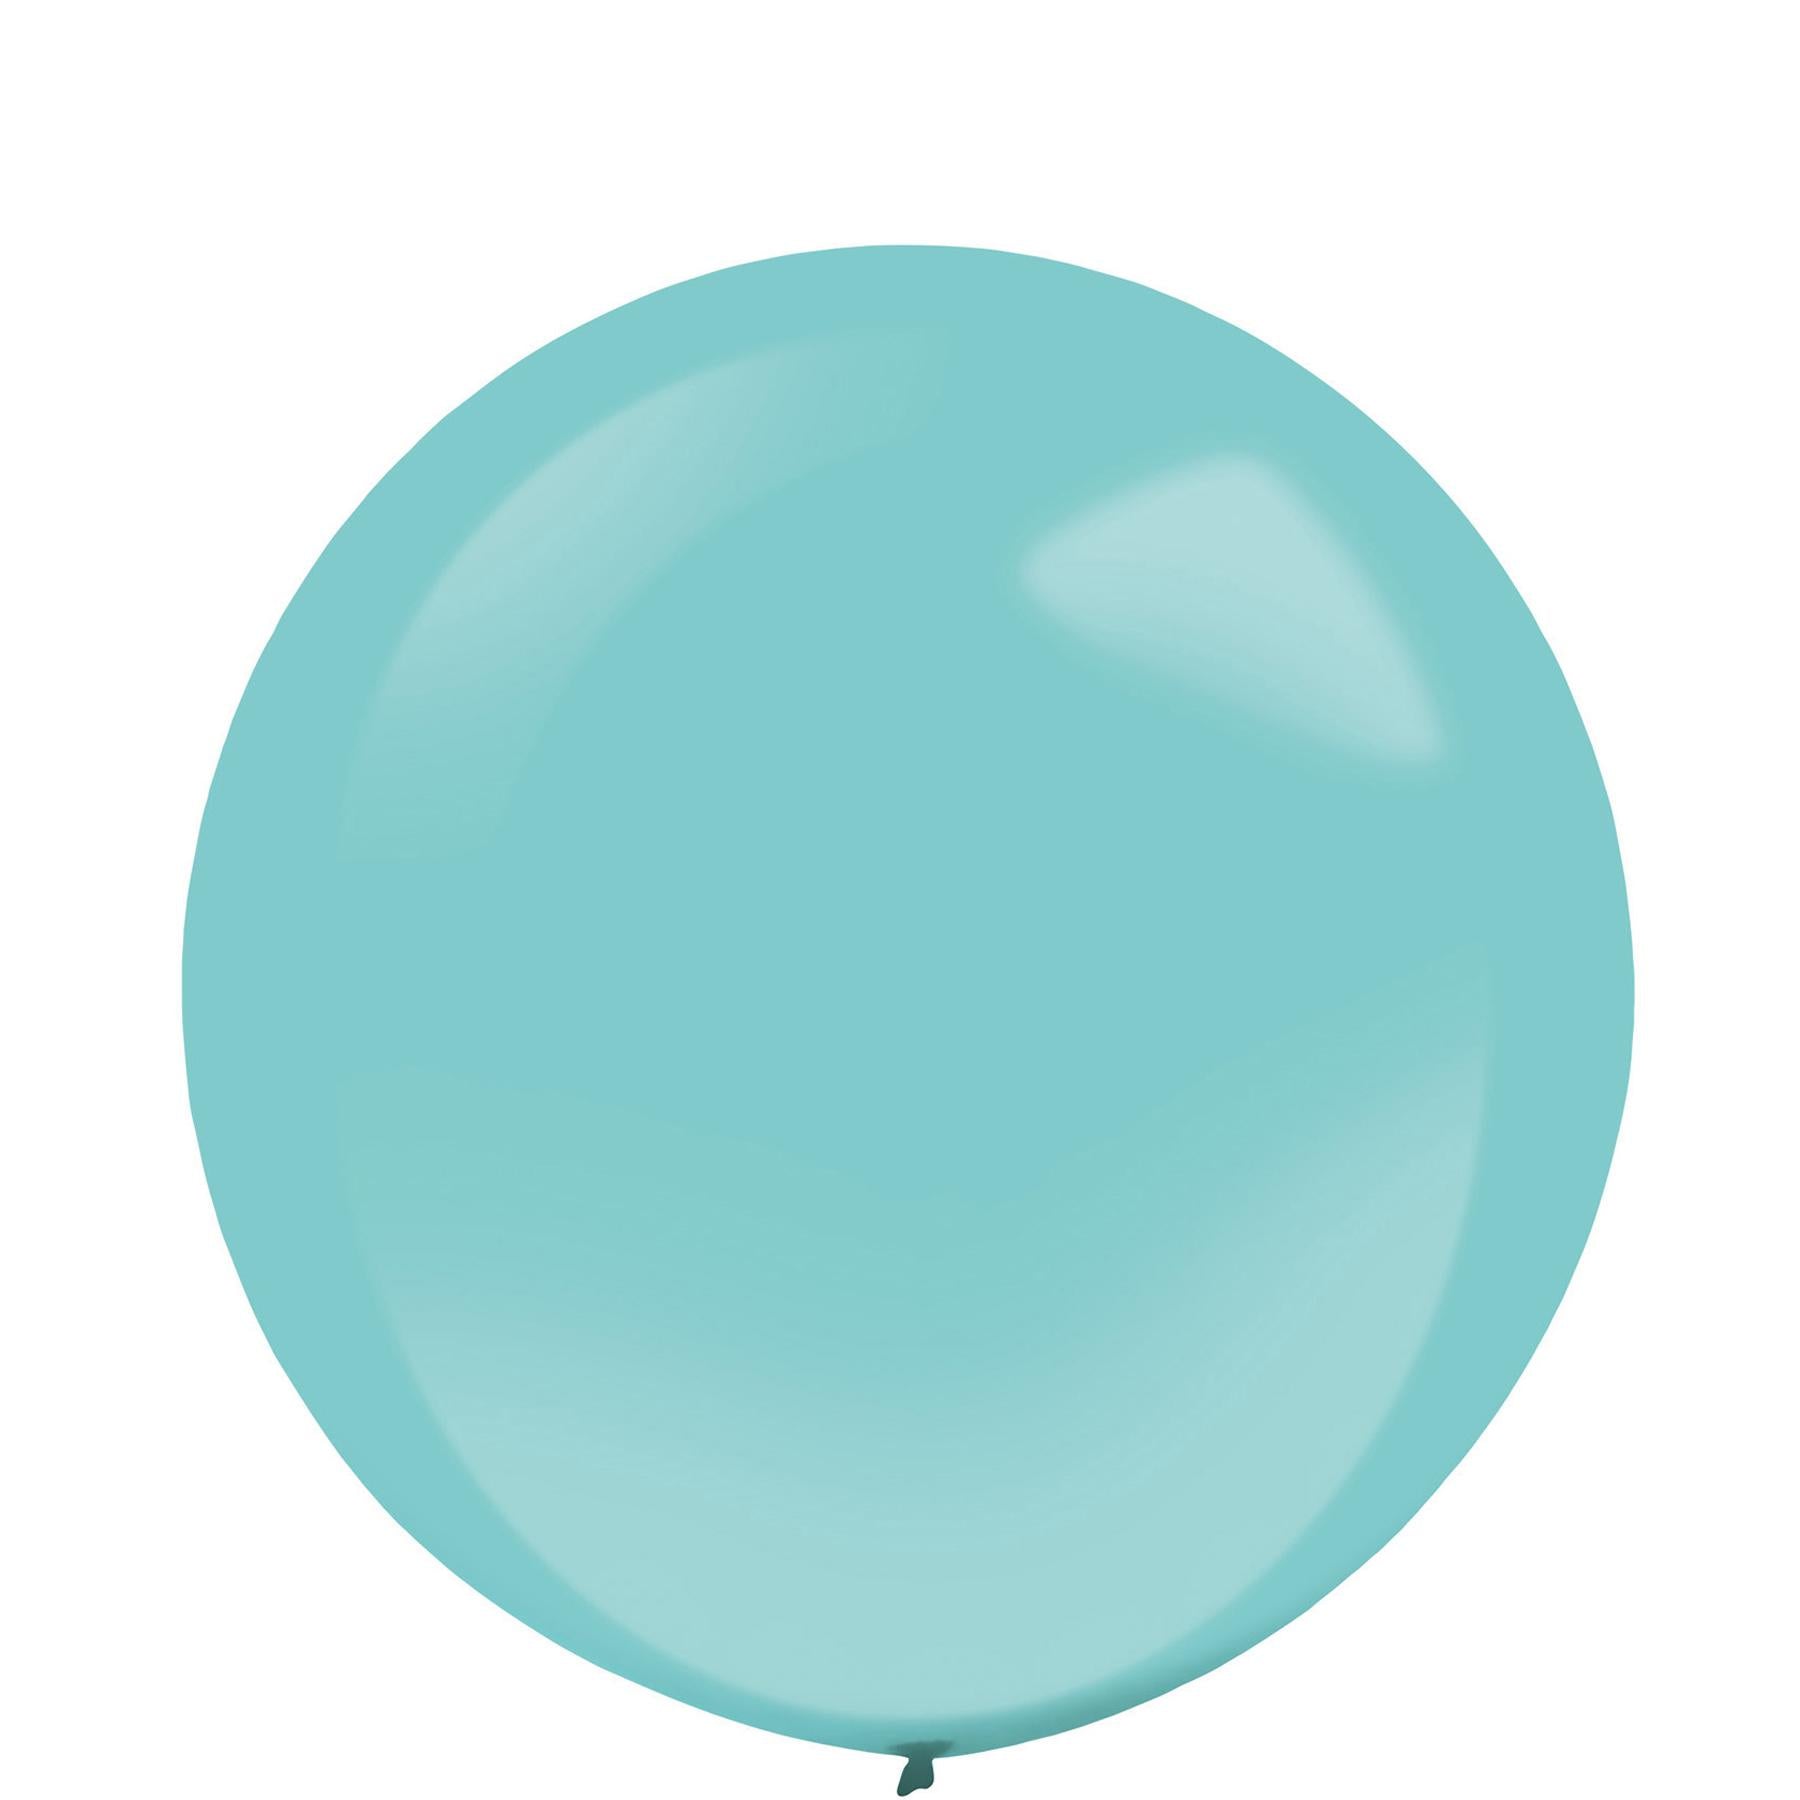 Robins Egg Blue Fashion Latex Balloons 24in, 4pcs Balloons & Streamers - Party Centre